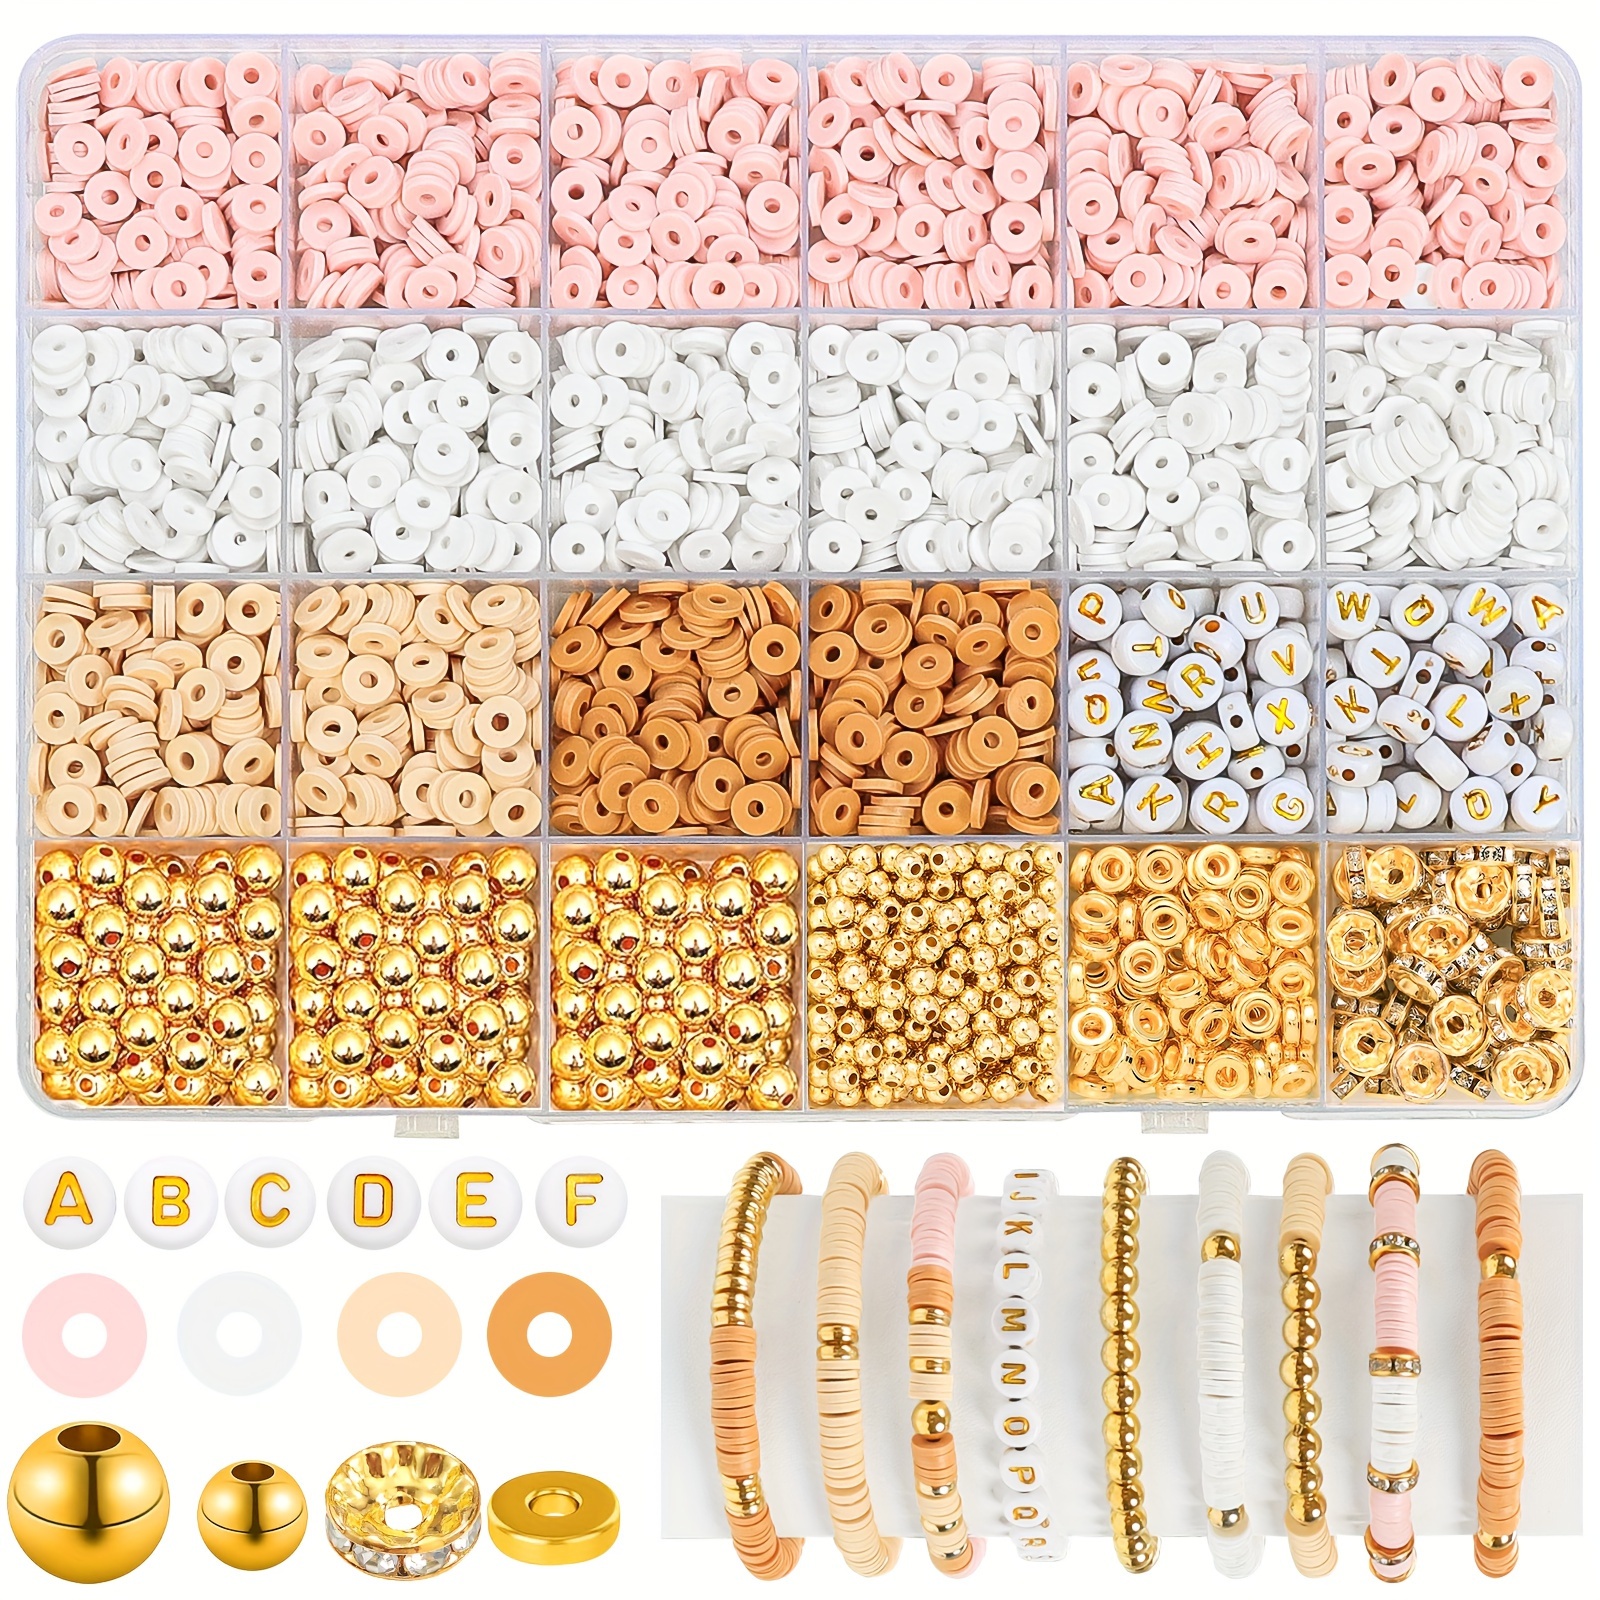  7600Pcs Clay Beads Kit for Bracelet Making, 24 Colors 6mm Flat  Round Polymer Clay Beads Spacer Heishi Beads with Alphabet Letter Beads  Pendant Charms for Jewelry Making : Arts, Crafts 